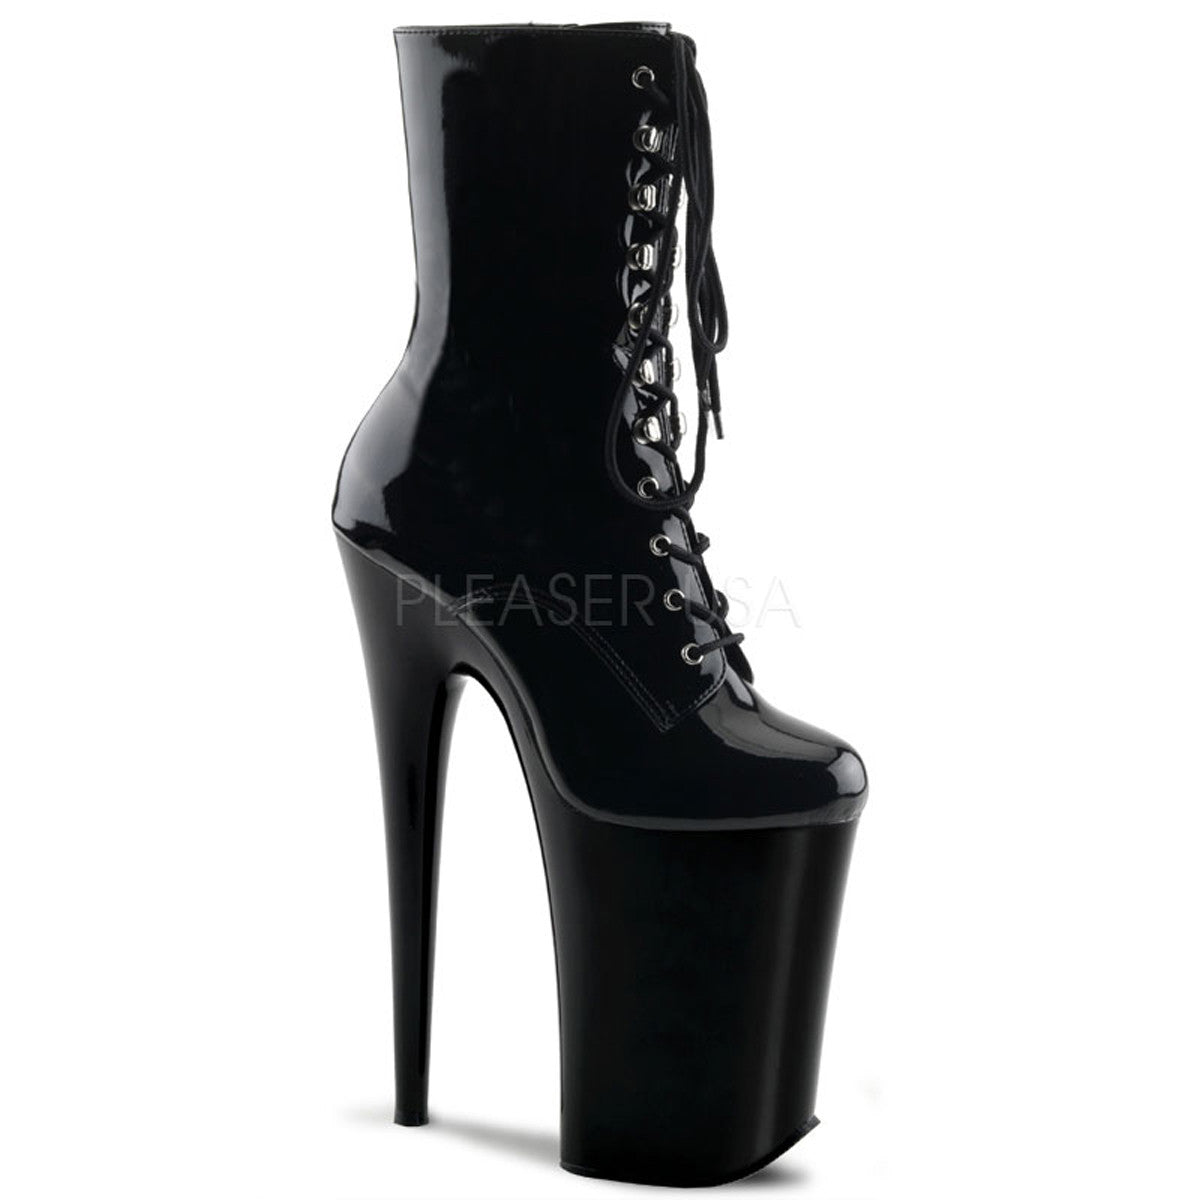 PLEASER INFINITY-1020 Black 9 Inch Heel Ankle Boots - Shoecup.com - 1